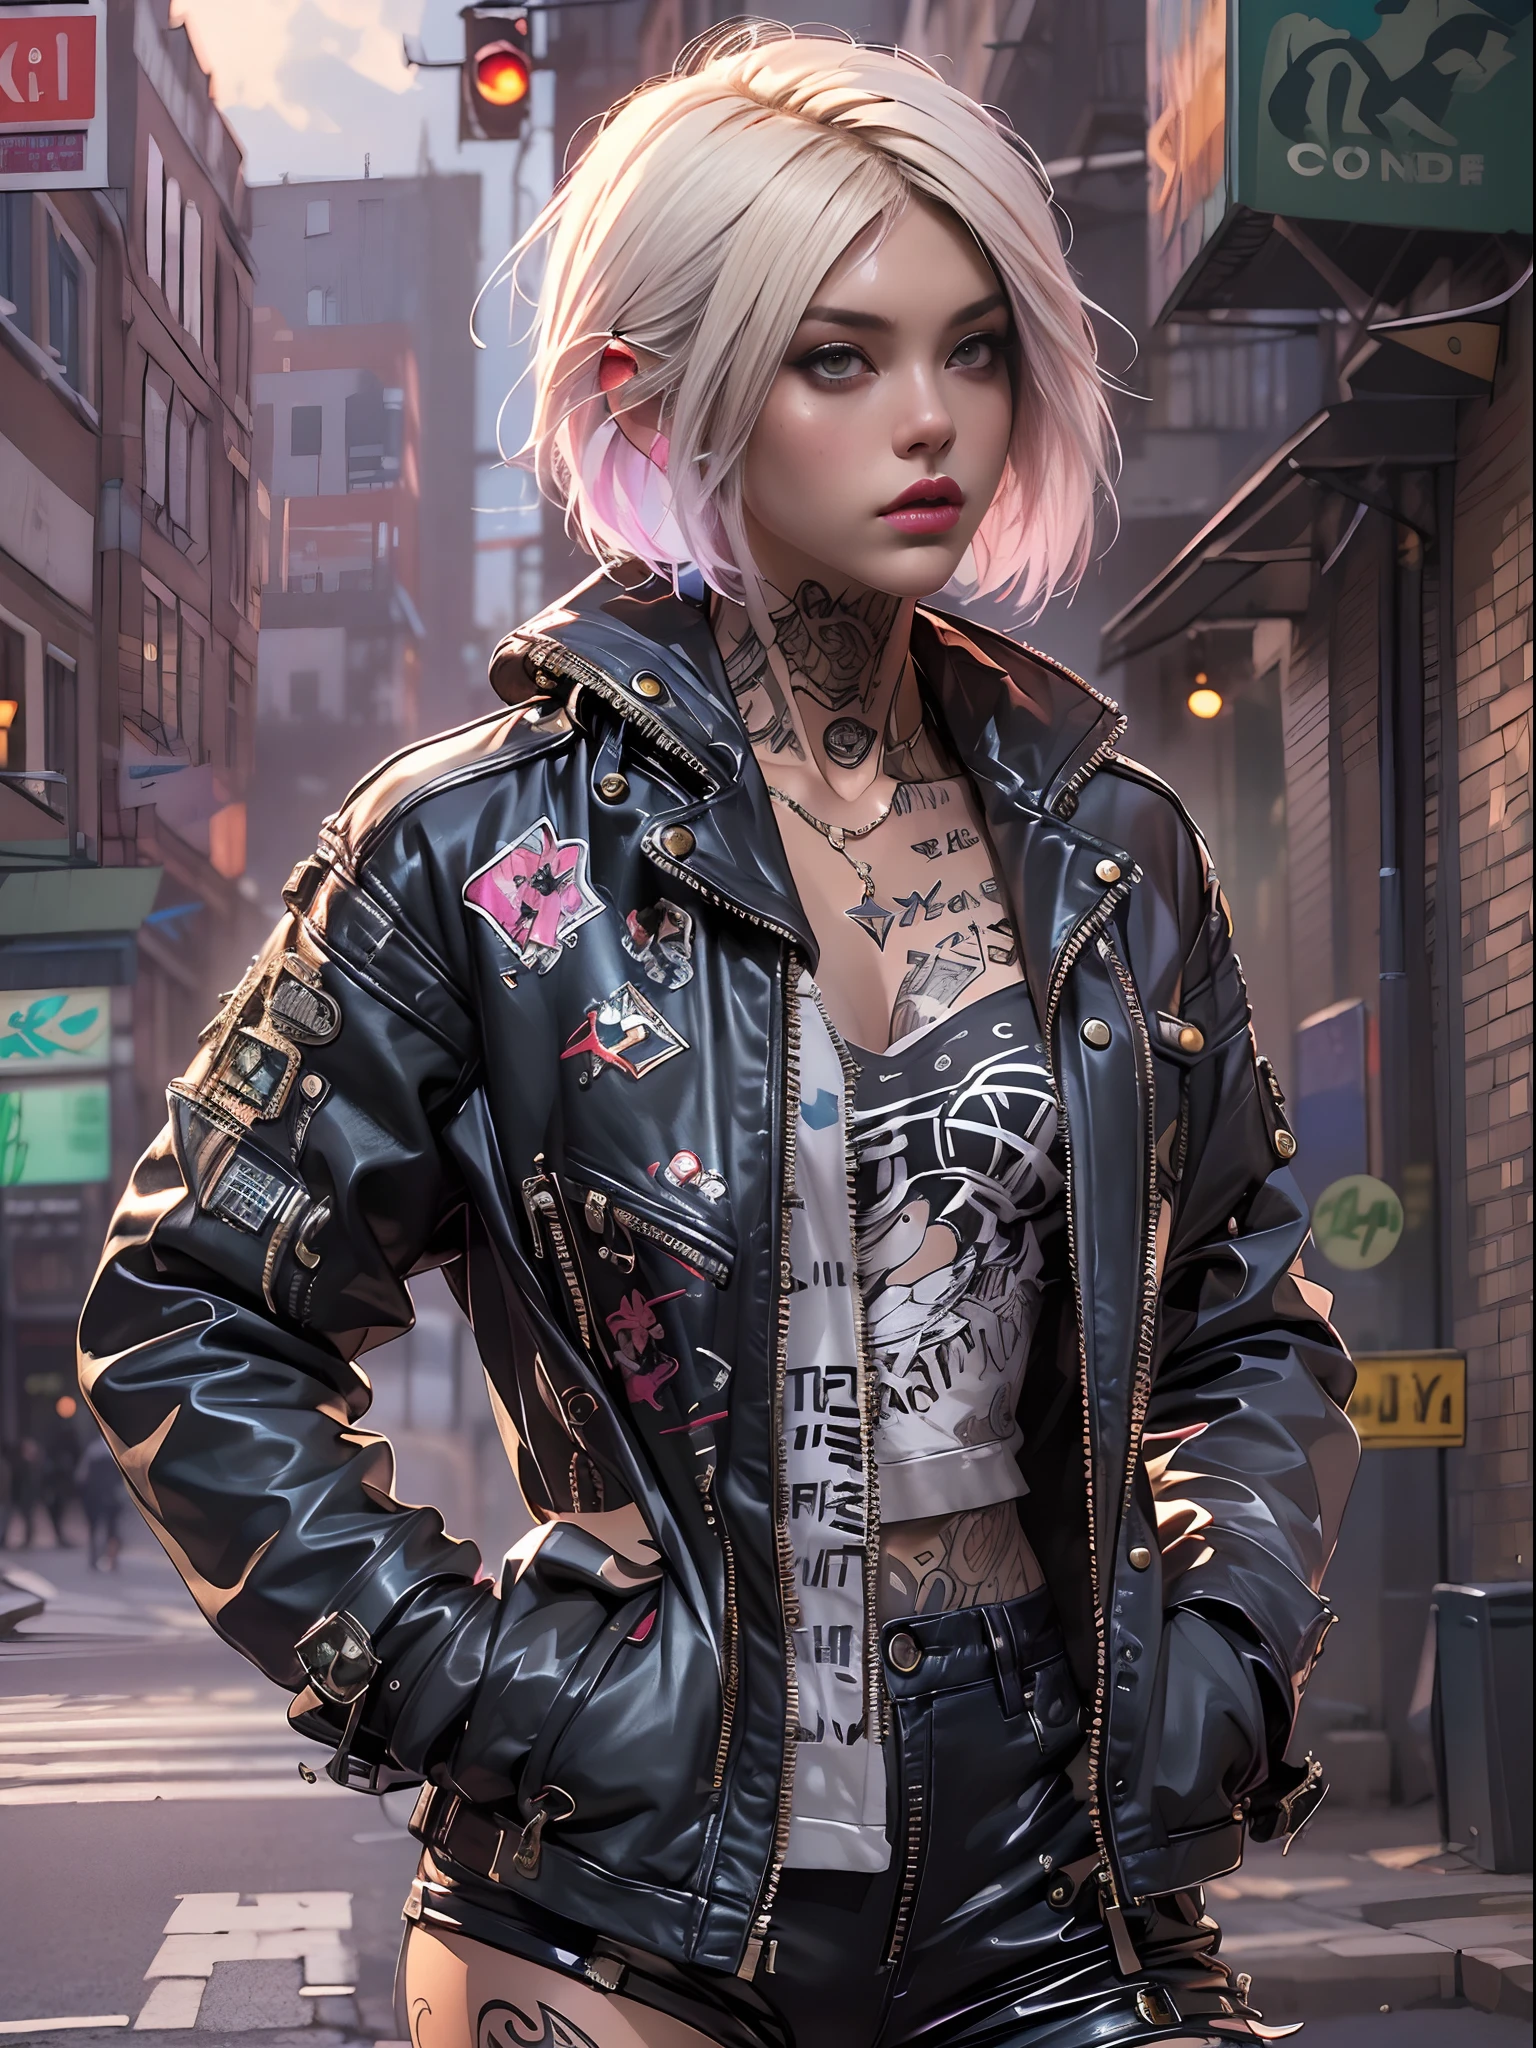 (((of the highest quality: 1.4))),(unparalleled masterpiece ever), (Ultra high definition),(Ultra-realistic 8K CG), offcial art、 (((adult body))), (((1girl in))), ((( Bob Shorthair ))), Punk girl with a perfect body, Jacket with metal spines,Beautiful and well-groomed face,,Detailed punk fashion,leather jackets, (Image from head to thigh),(( White Blonde Bob Shorthair )), Small leather panties, Simon Bisley's urban savage style,Detailed London street background,Clean abs, Complex graphics, Dark pink with white stars and gray and white stripes, (( Many poison tattoos )), ,